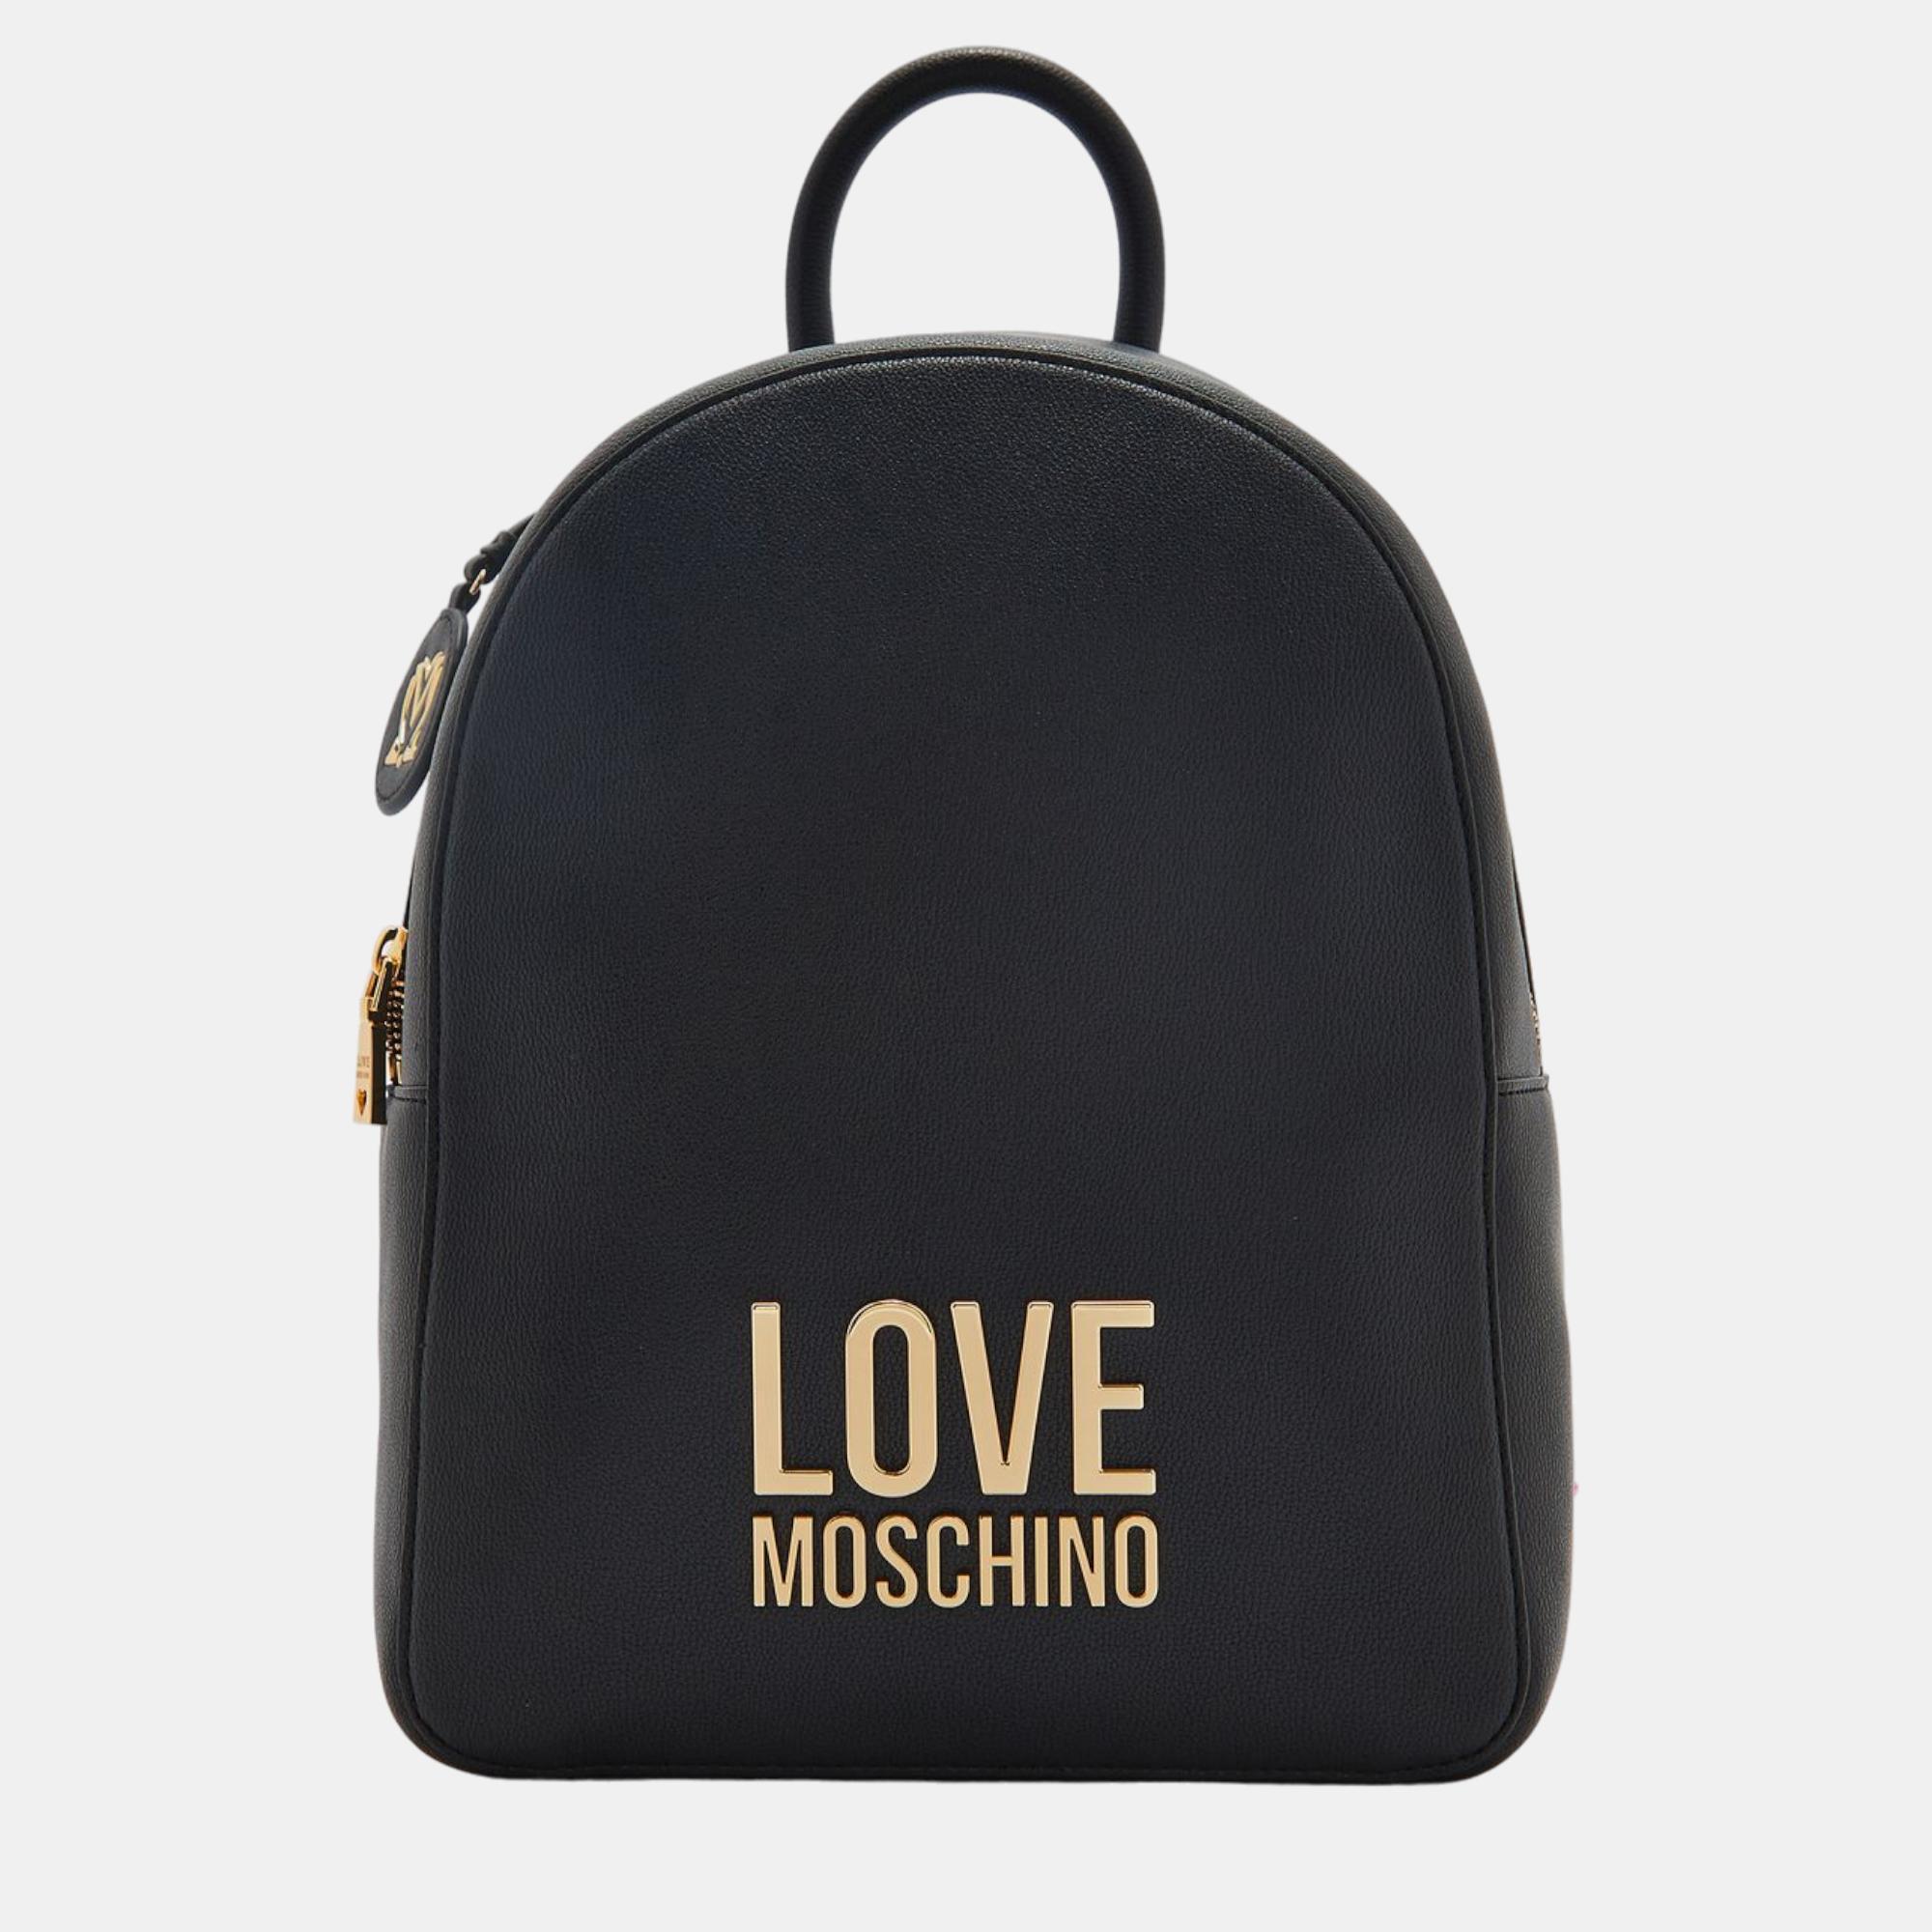 Love moschino black poleyster backpack